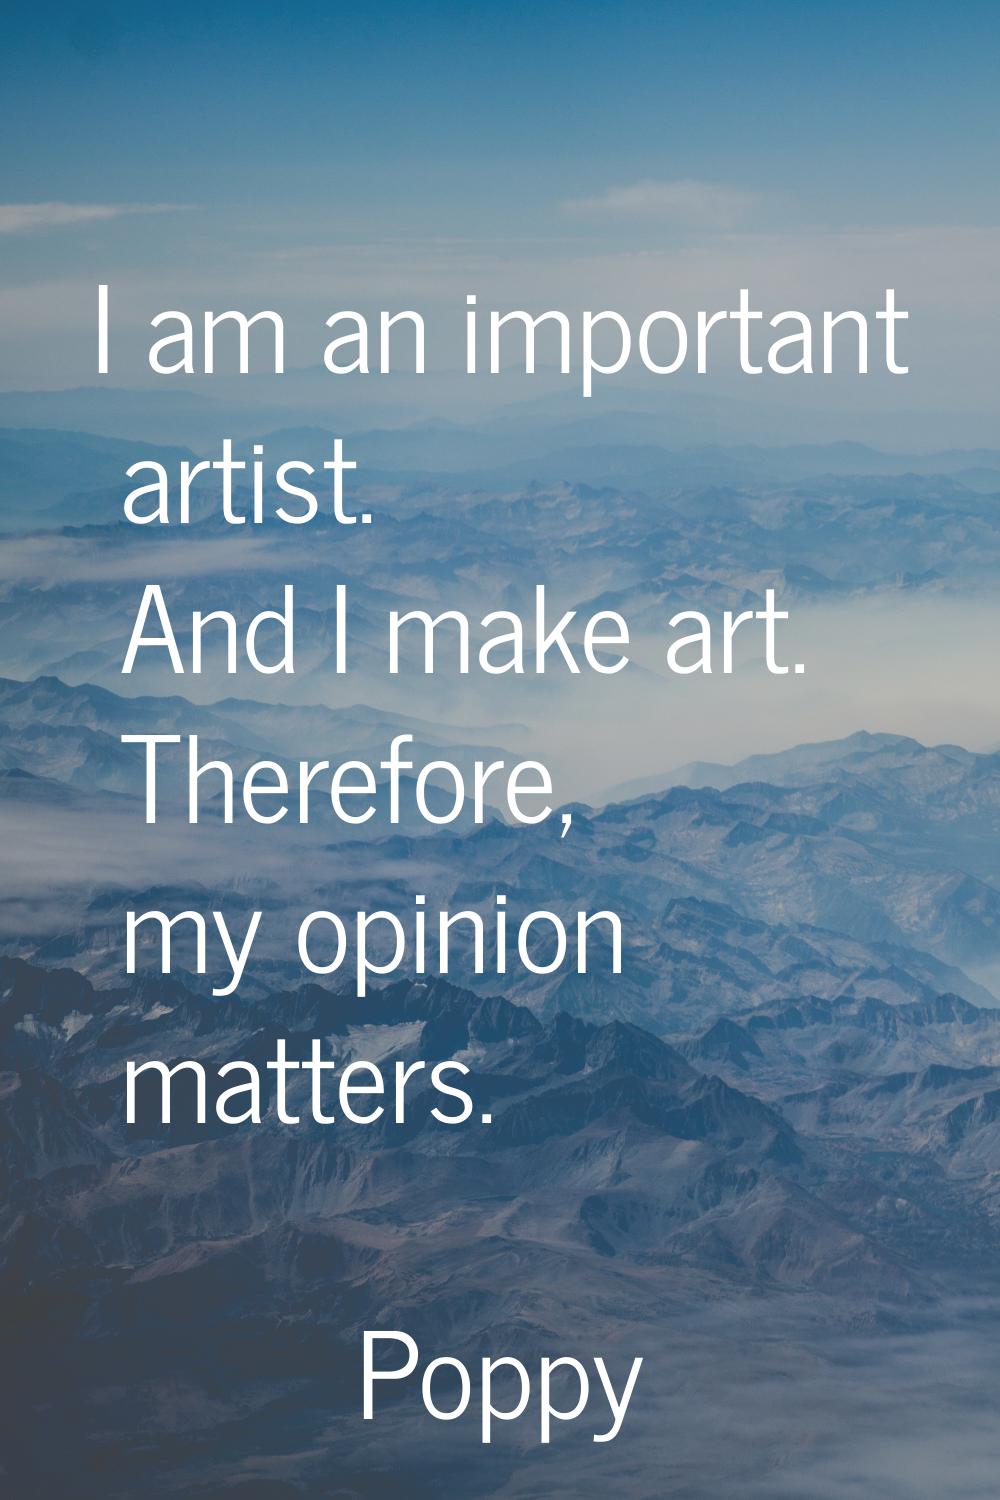 I am an important artist. And I make art. Therefore, my opinion matters.